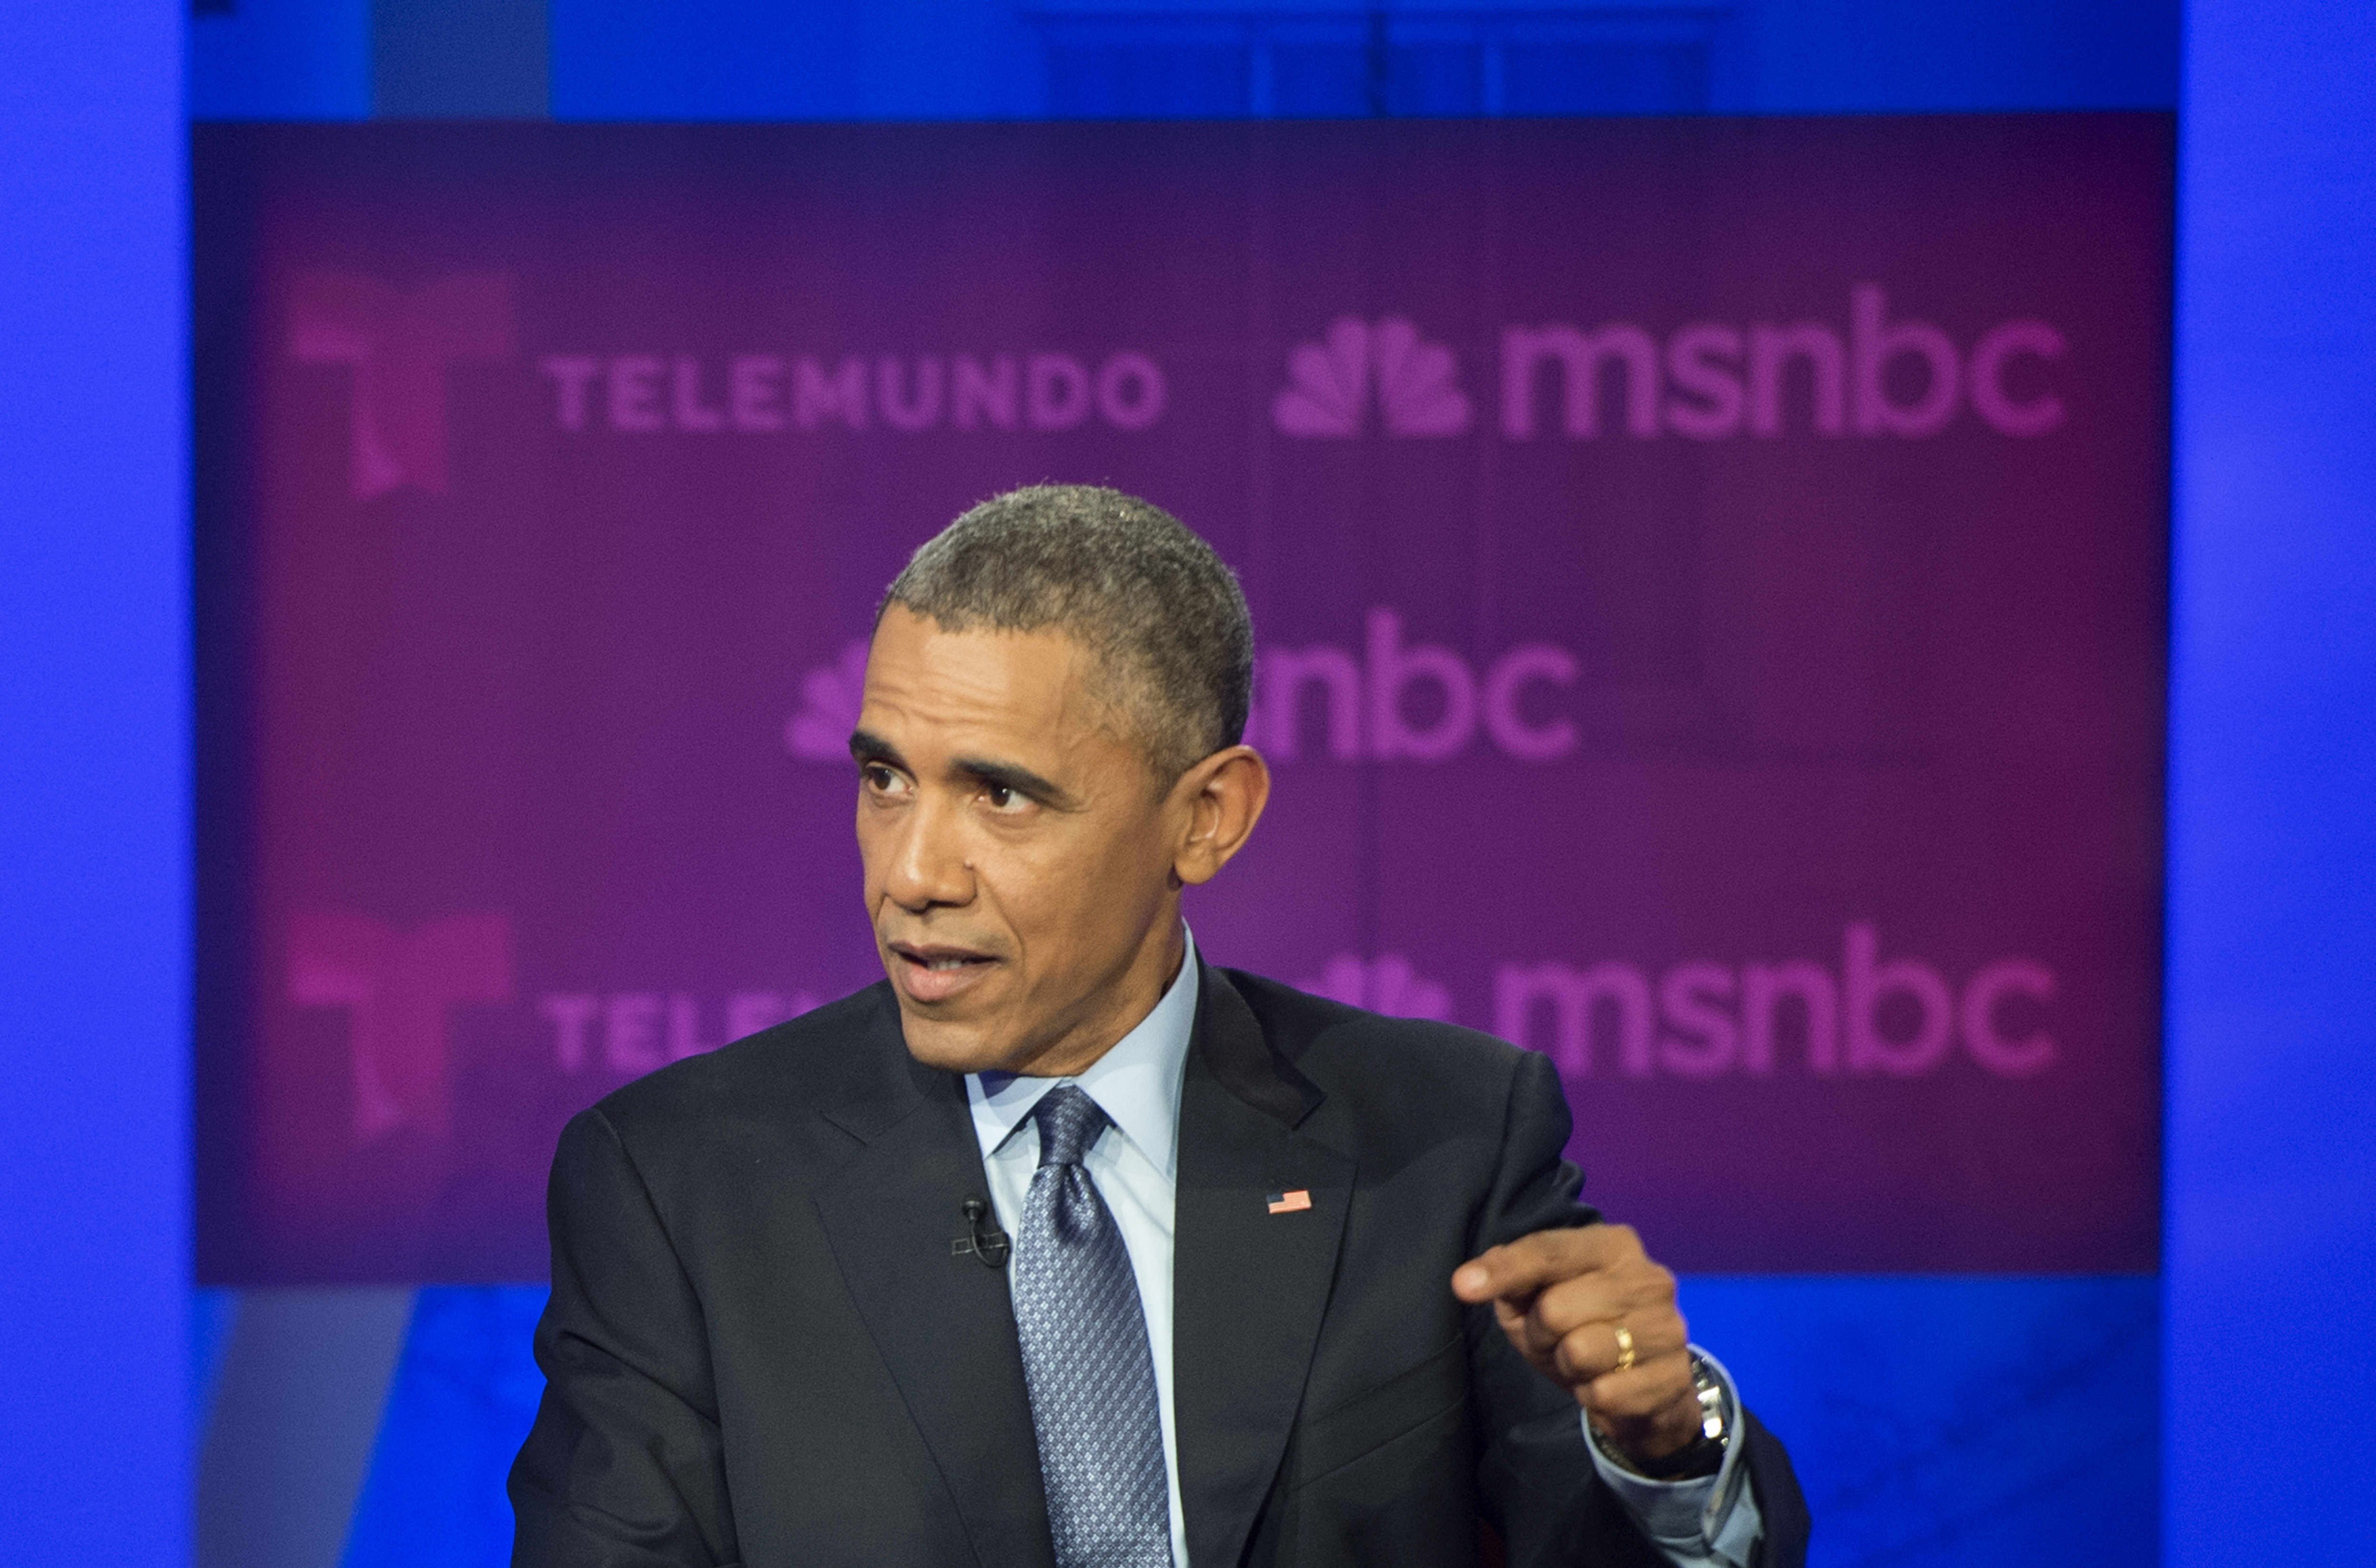 President Barack Obama answers a question from the audience during an immigration town hall meeting and Telemundo interview at Florida International University in Miami on Feb. 25, 2015.